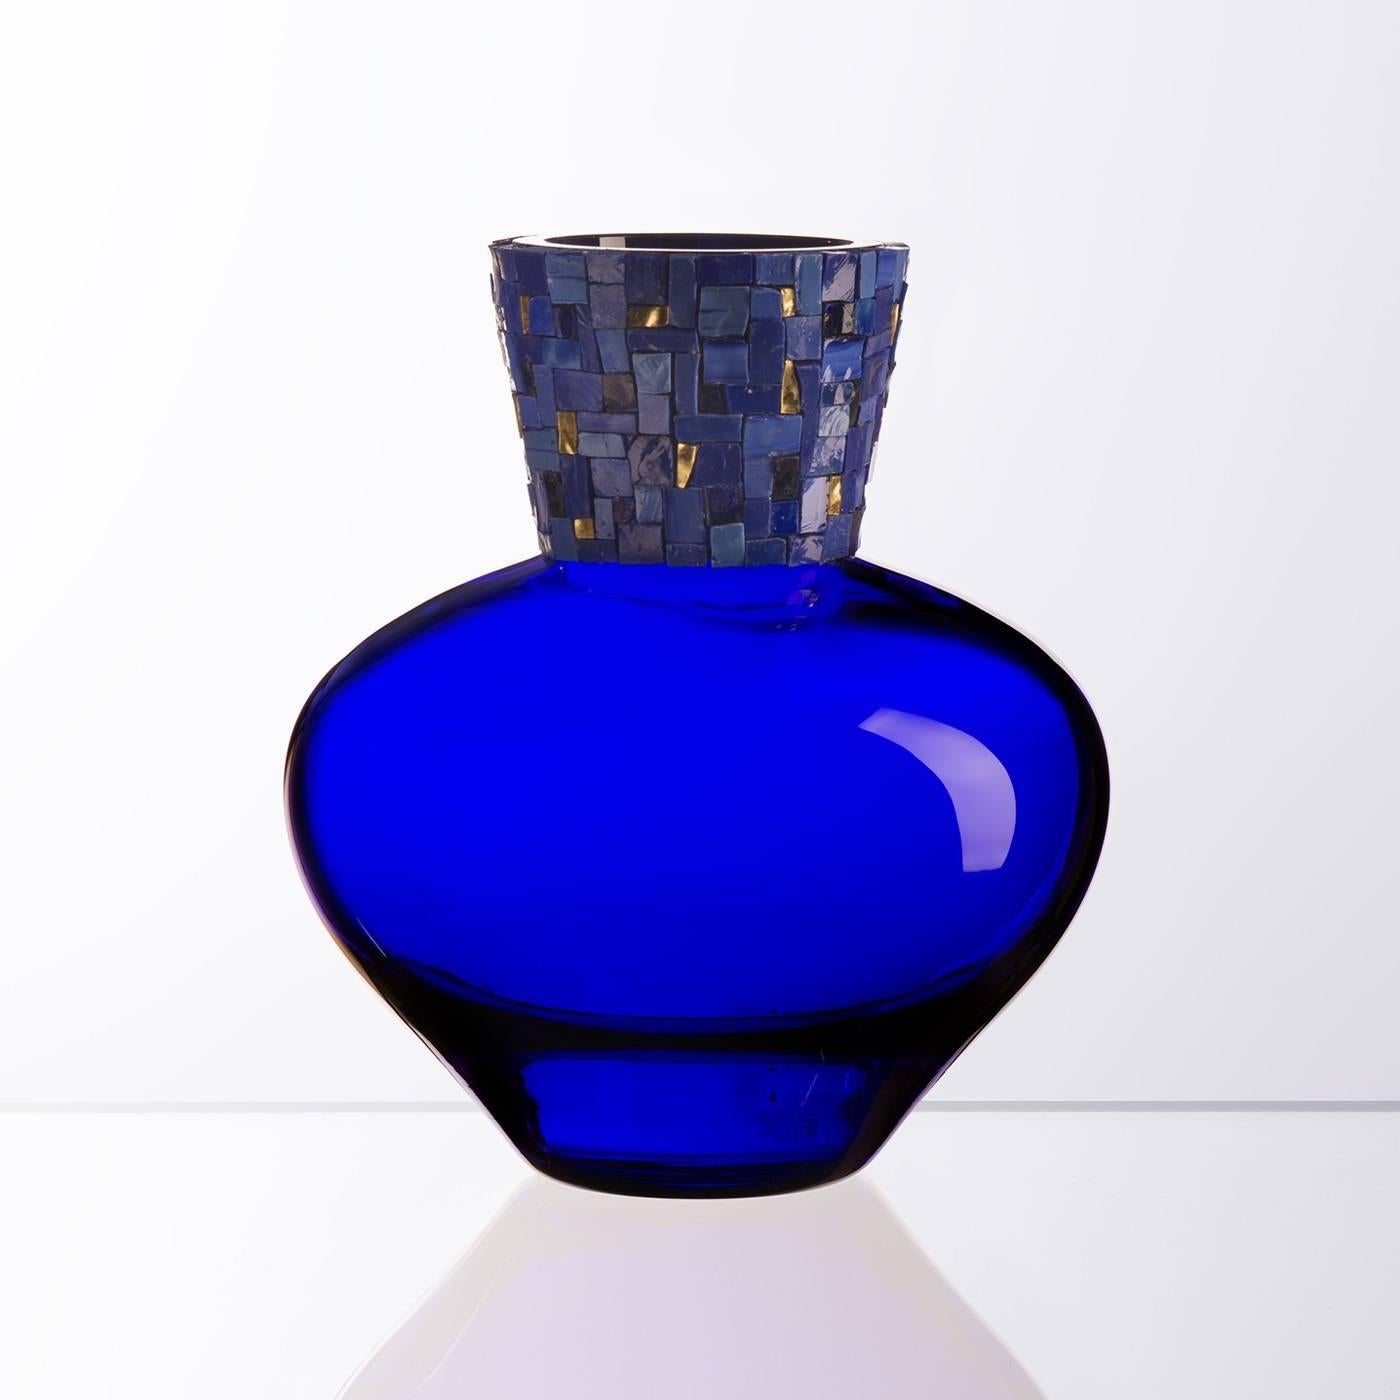 Elegant and unique, this sophisticated Murano mouth-blown glass vase is a perfect accent to enliven any interior design, thanks to the graceful mosaic details that grace its neck. The sinuous body is made of Murano mouth-blown glass in a bold, blue